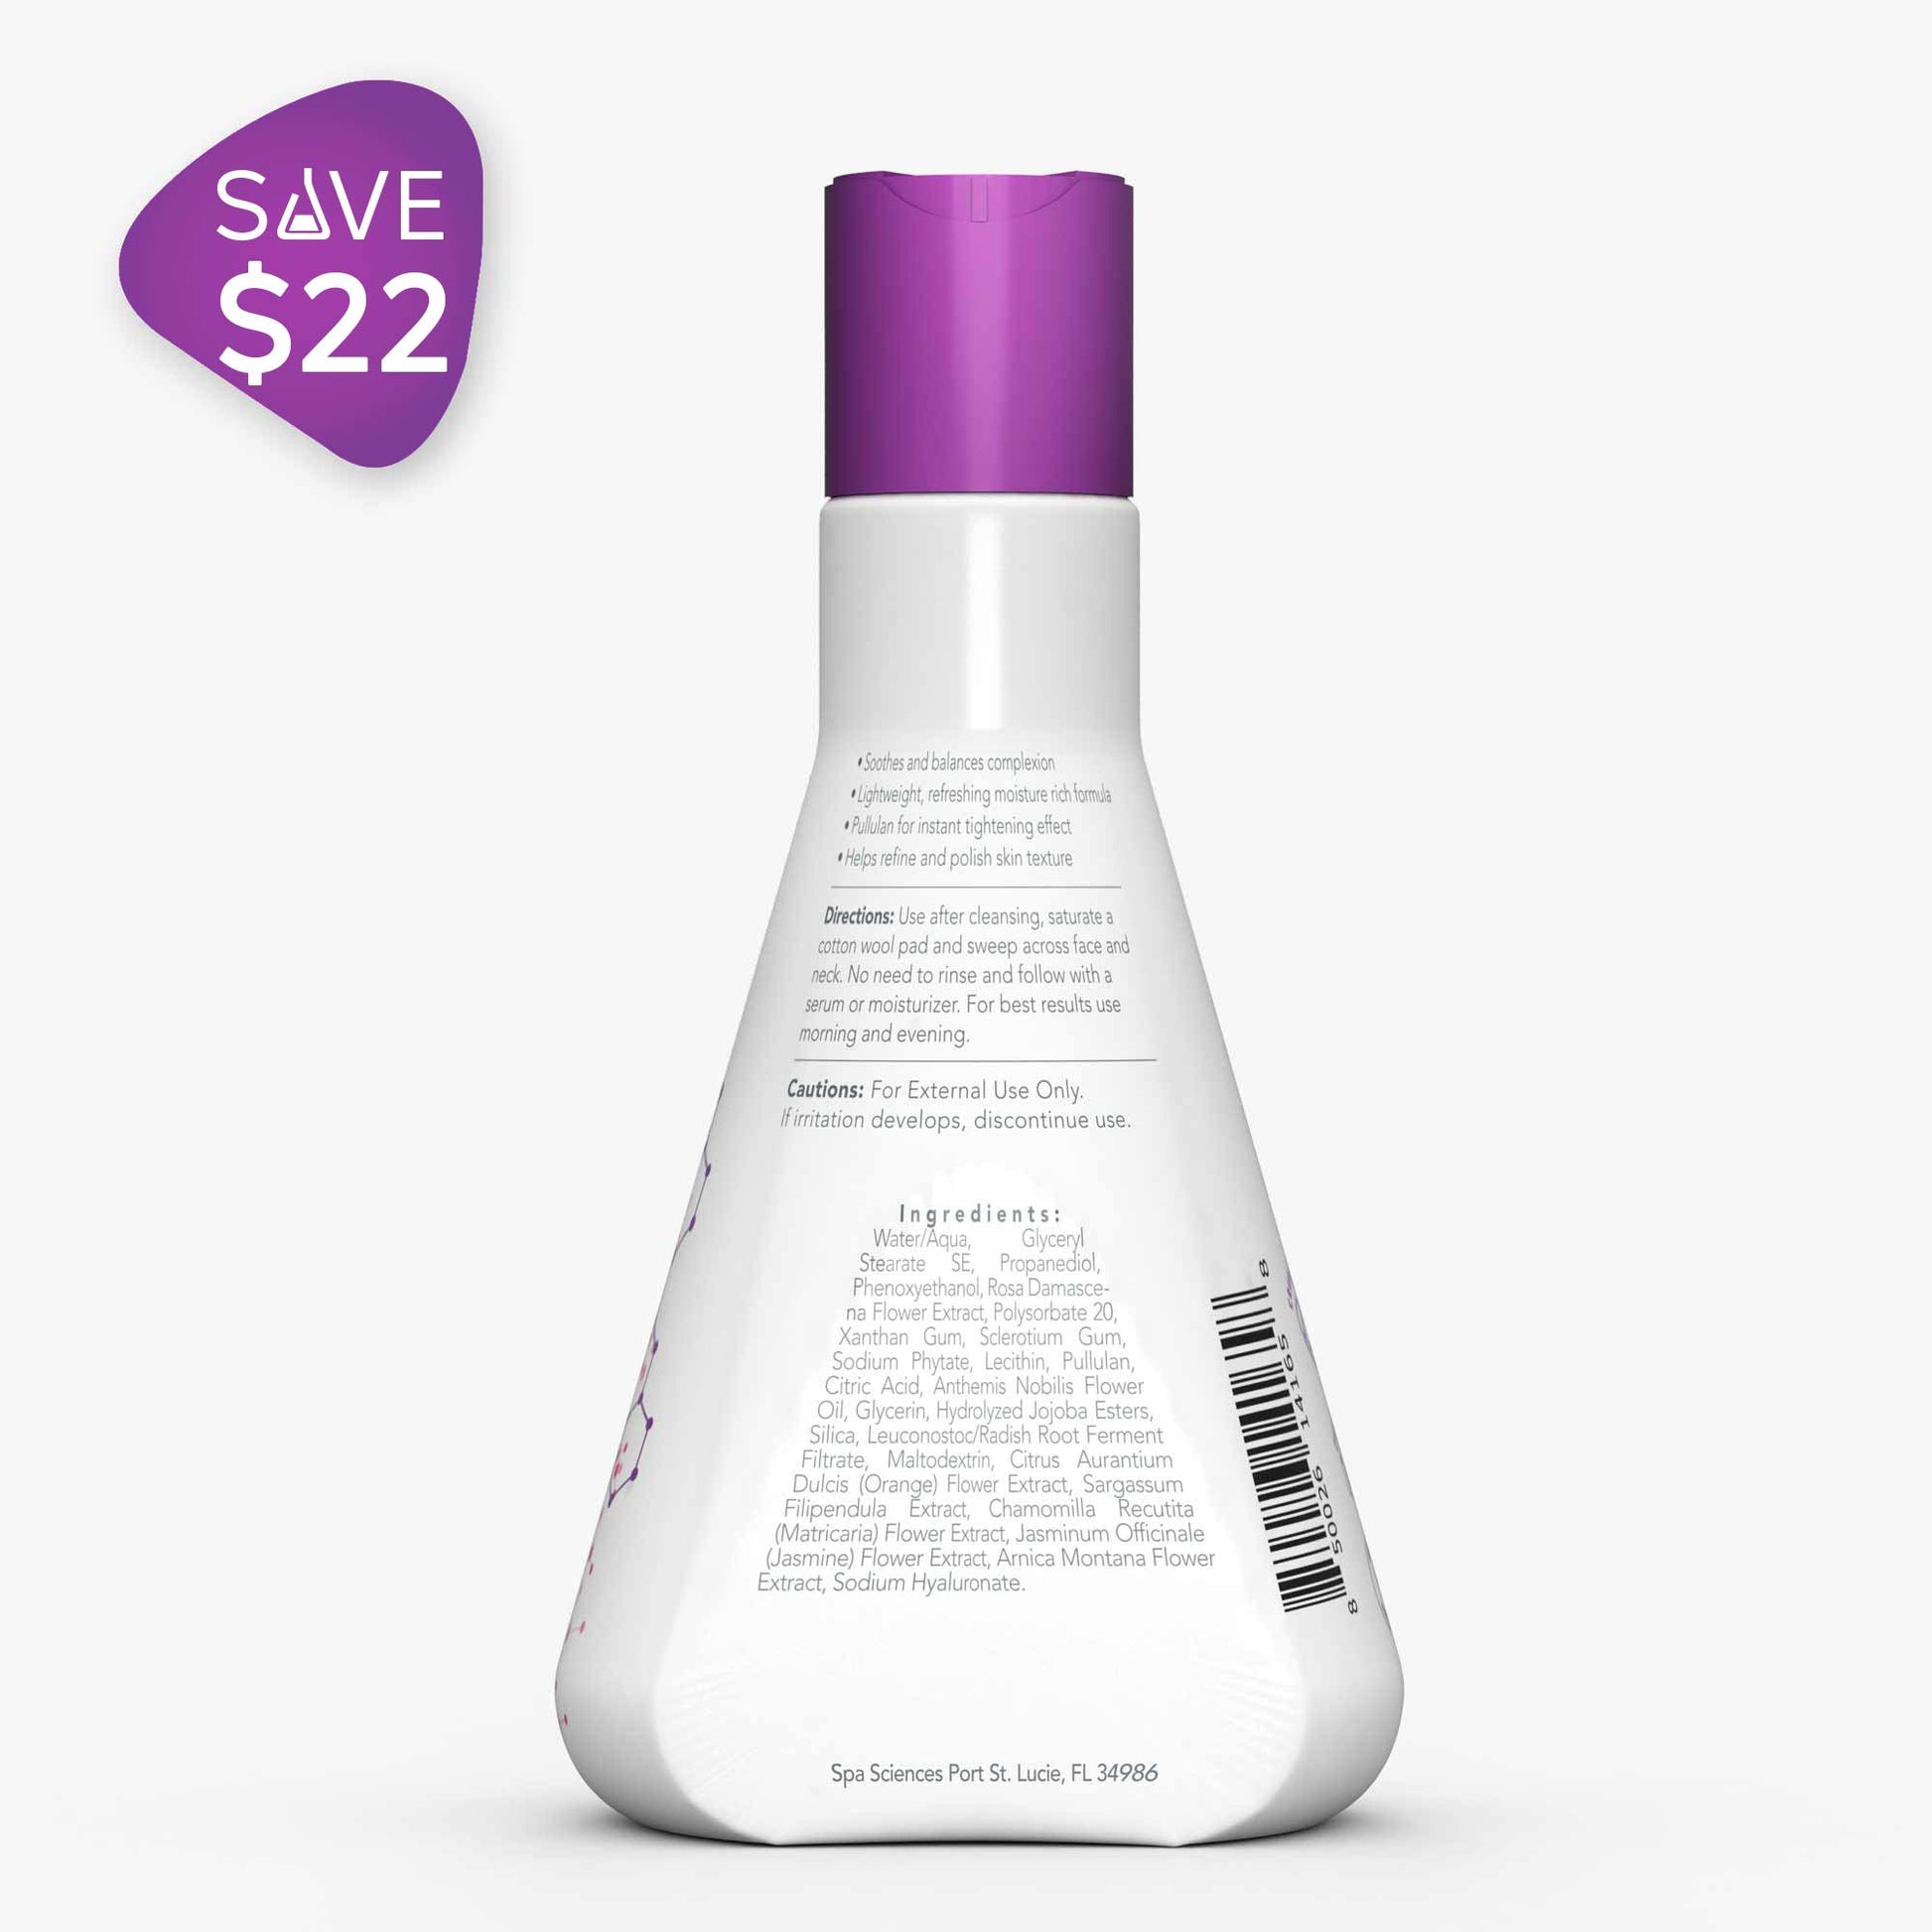 A bottle of On the Go Set shampoo with a purple label on it by Spa Sciences.